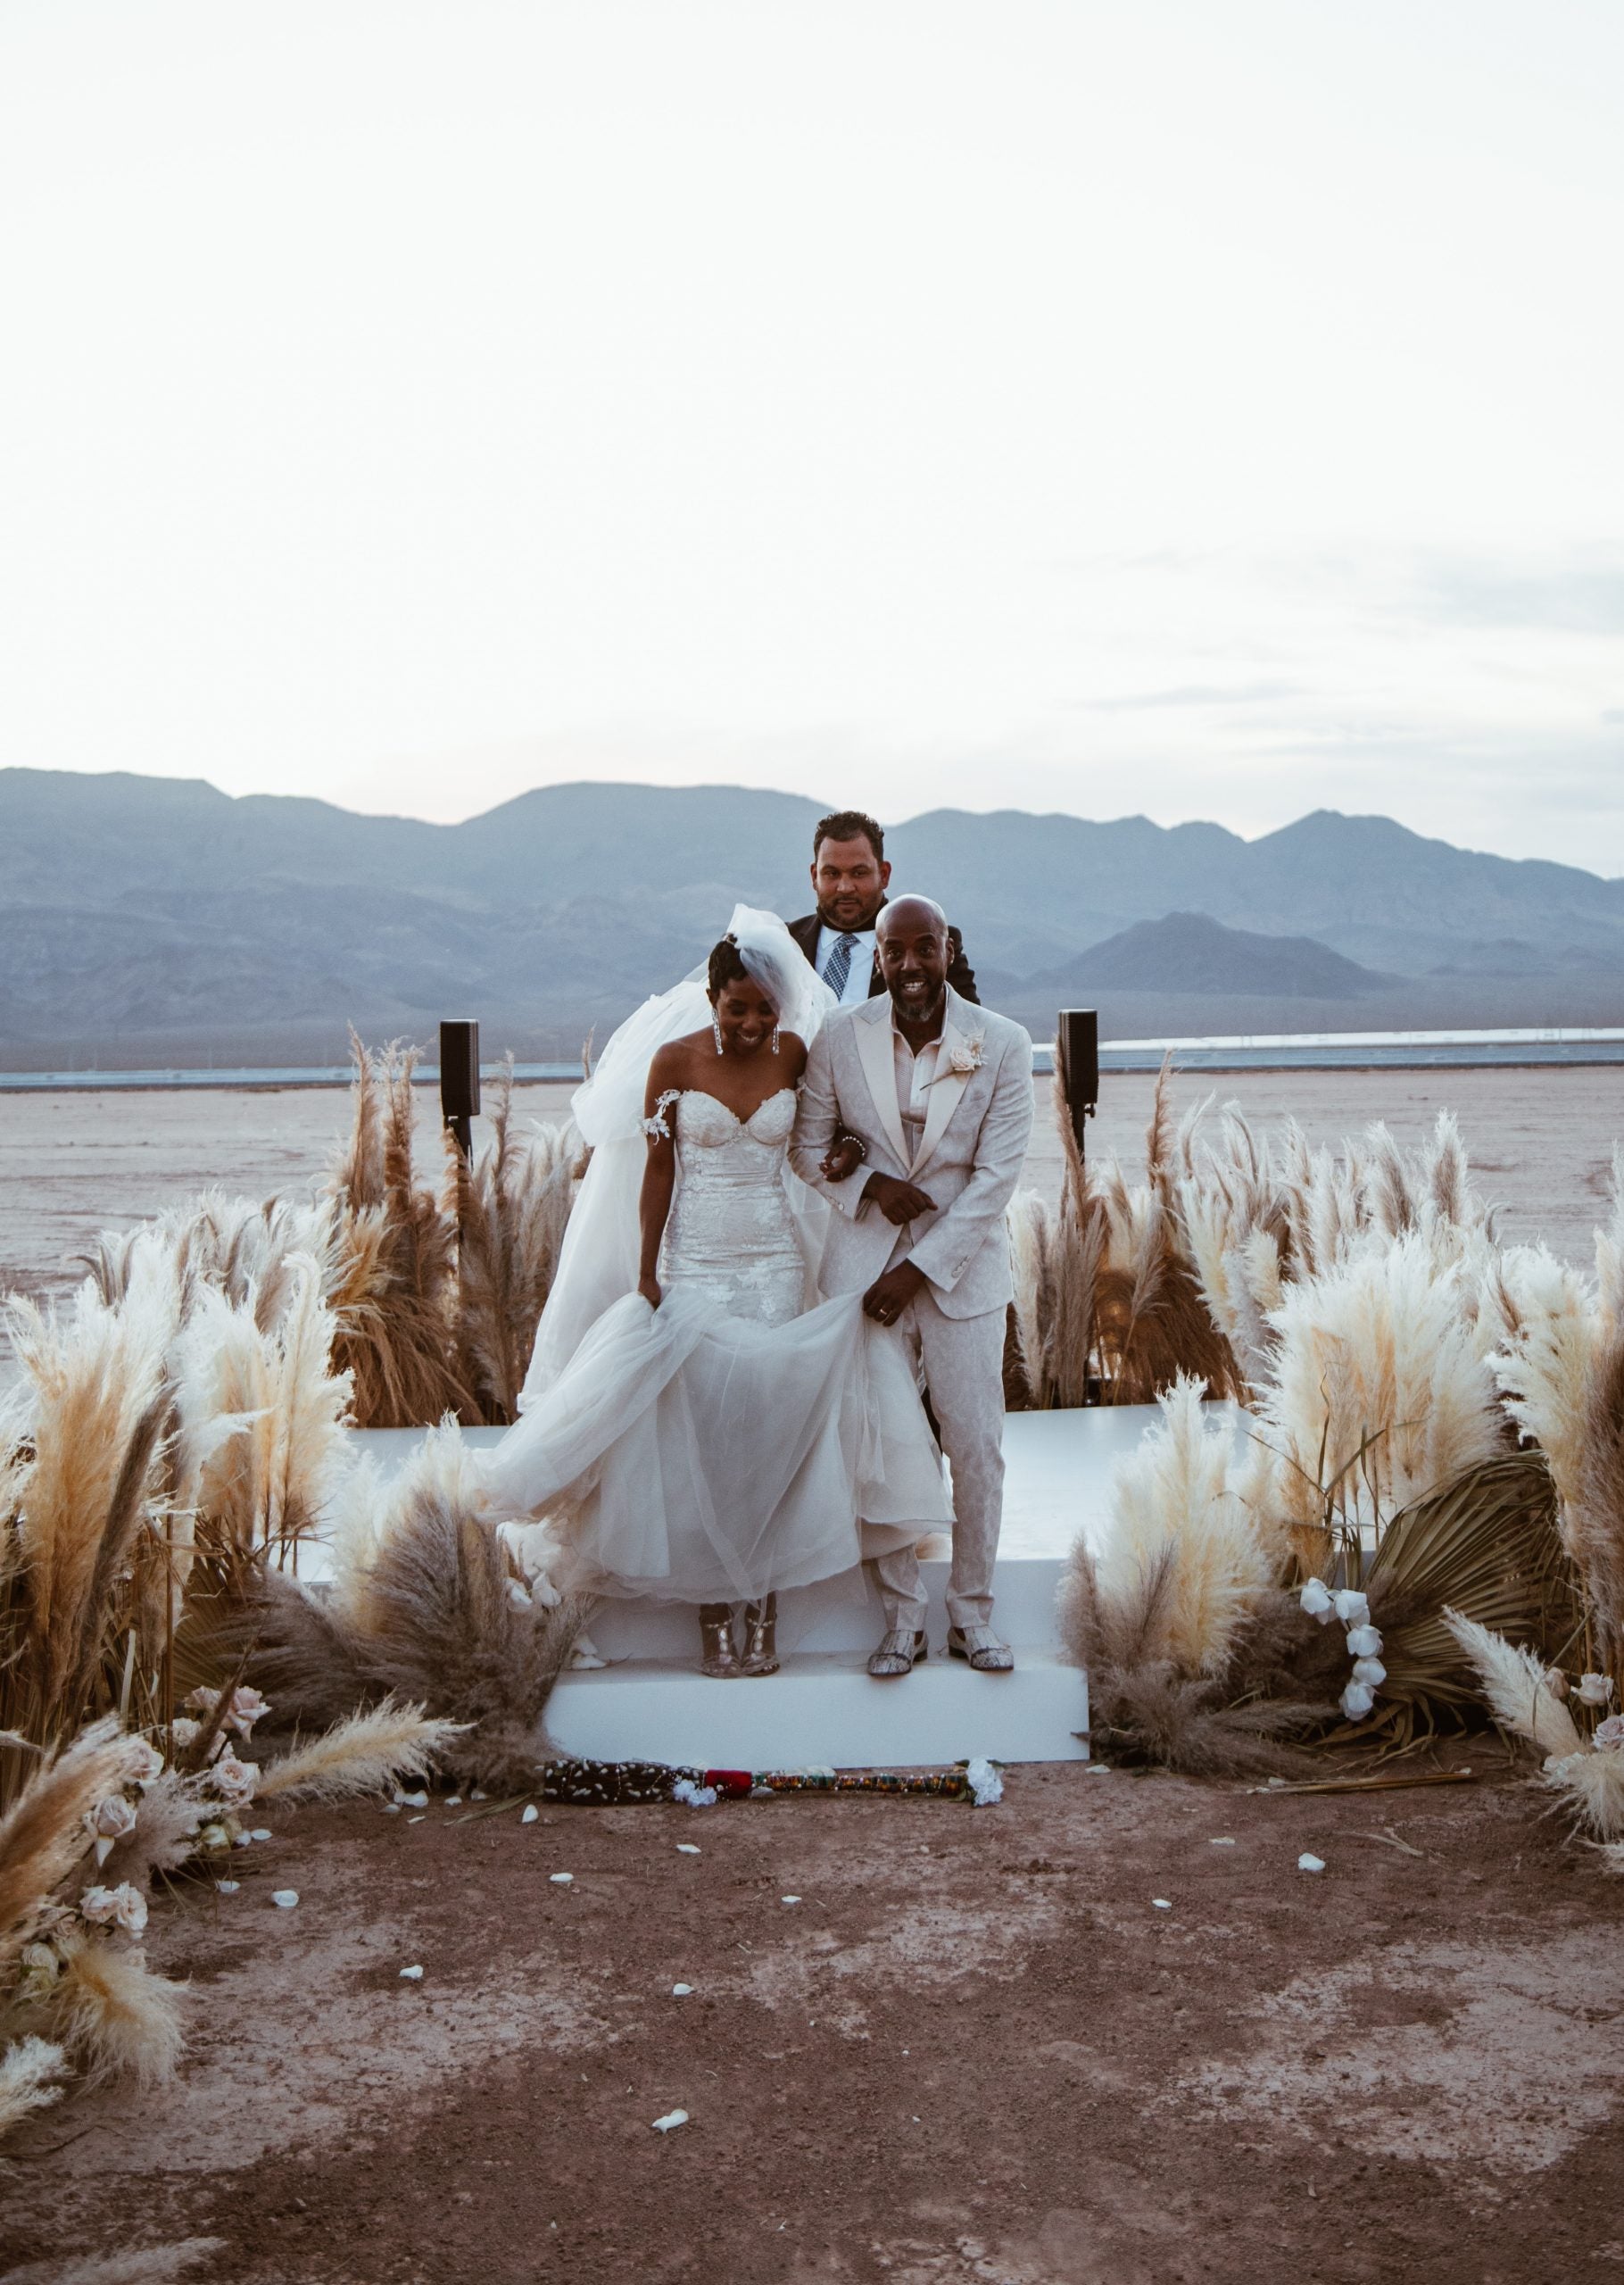 Bridal Bliss: Riqua And Andre's Las Vegas Wedding Included Showgirls, The Strip, And A Stunning Desert Ceremony